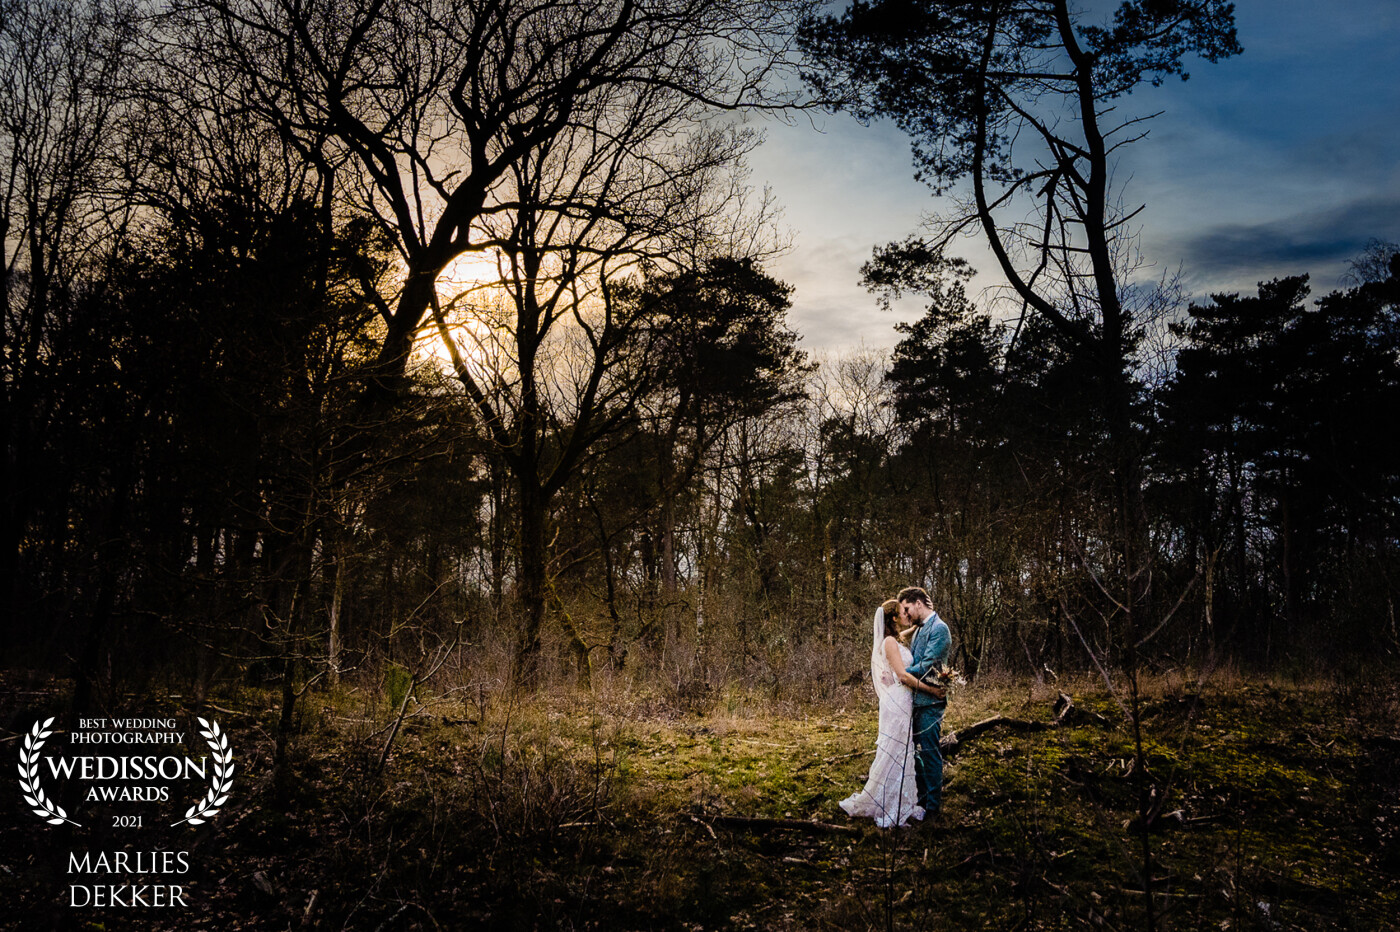 A winterwedding with the nicest temperatures possible :) The moment the sun shows itselve behind the trees and the sound of silence in the forest.